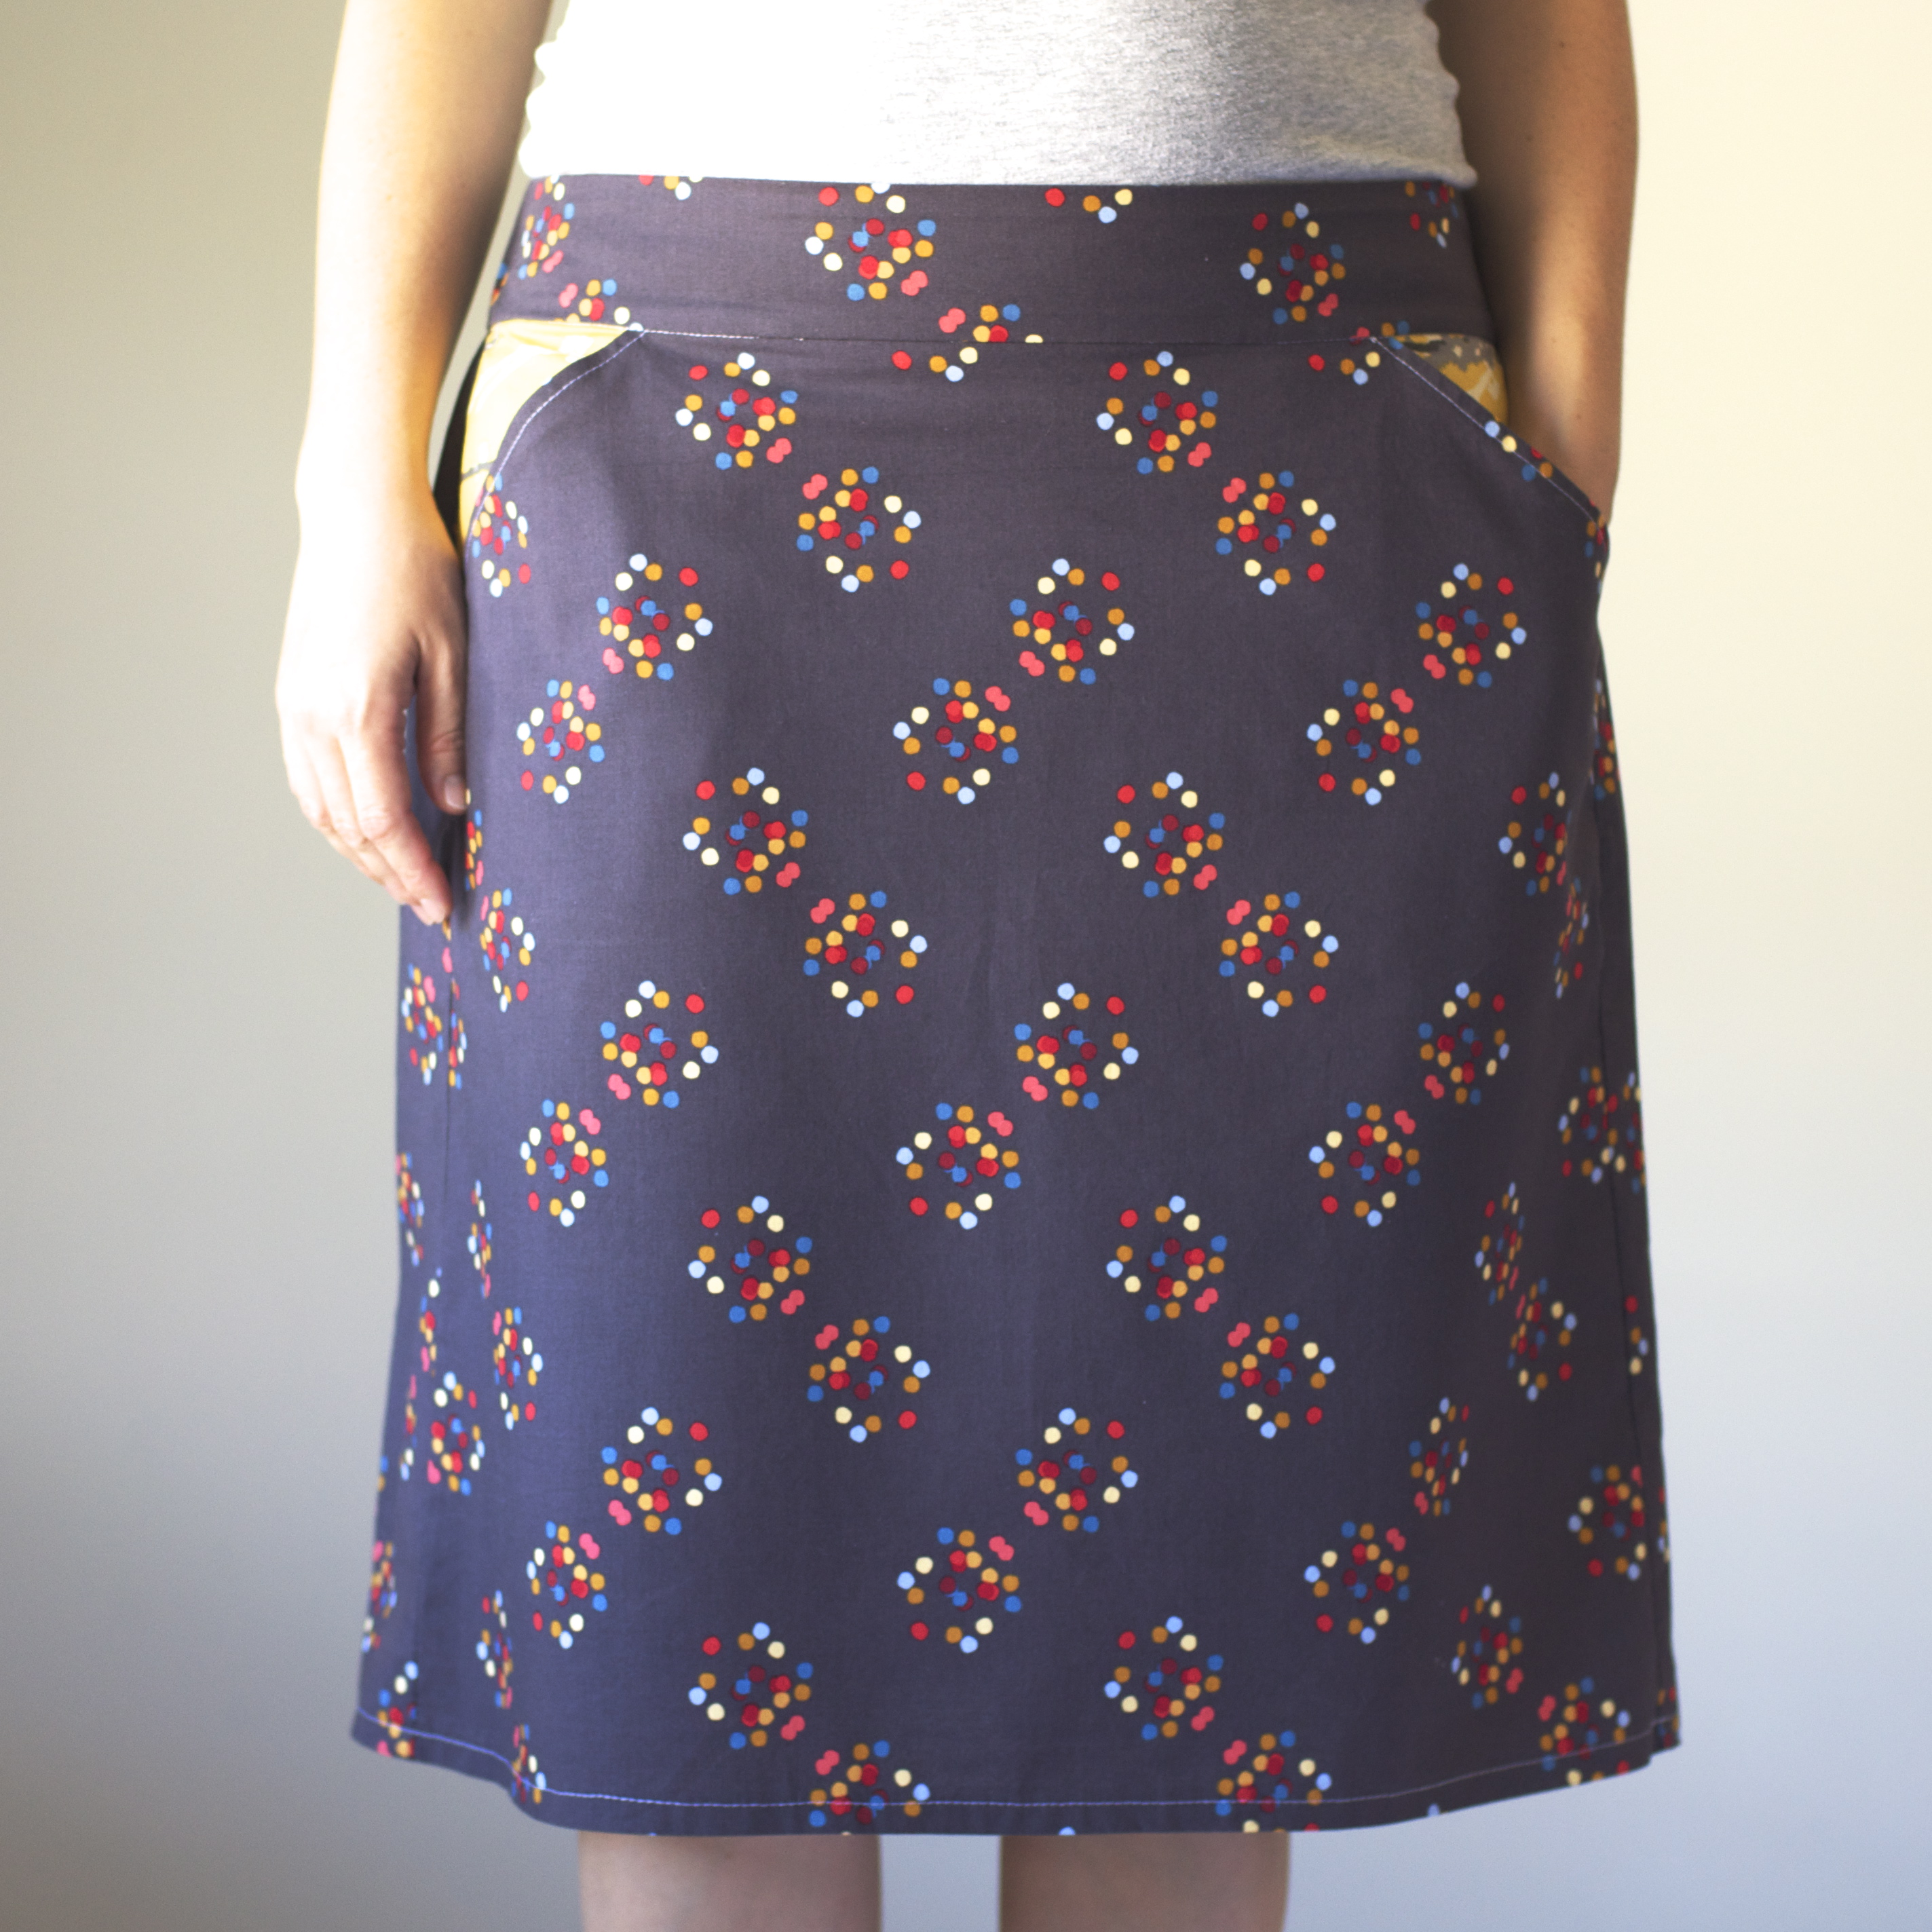 Skirt Patterns For Sewing 70